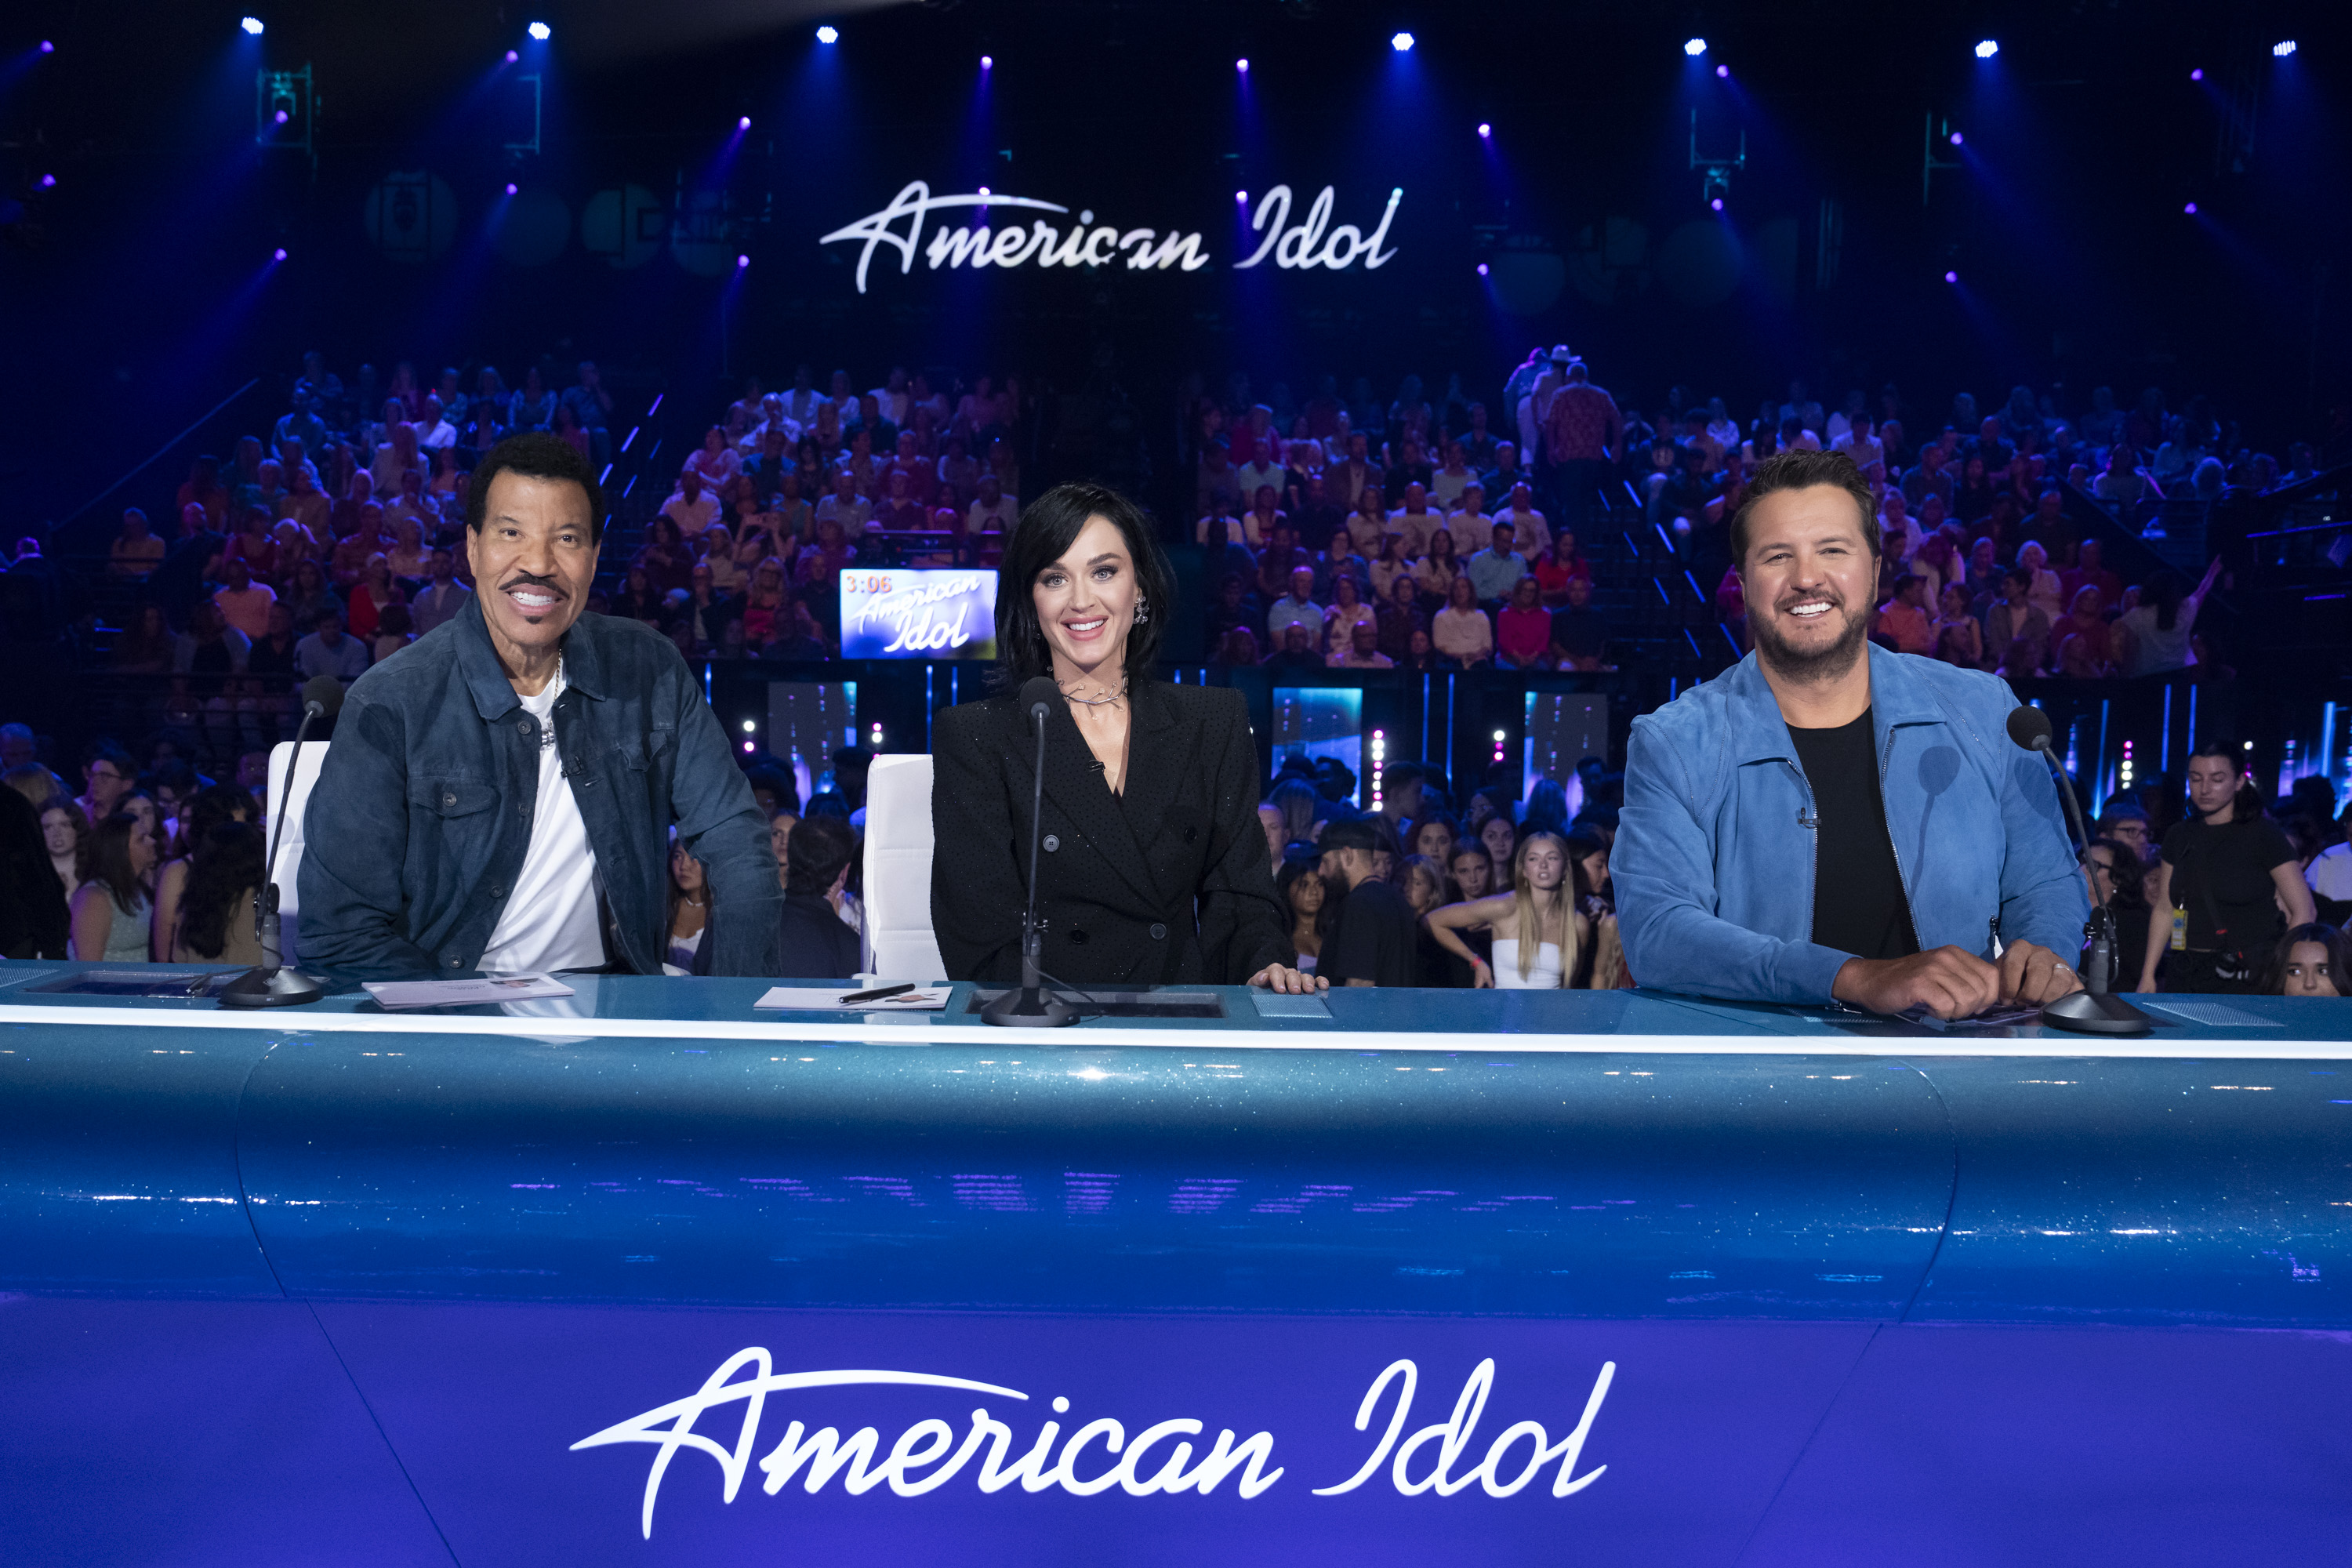 She will replace Katy Perry (center), and work alongside Lionel Richie (left) and Luke Bryan (right) on American Idol